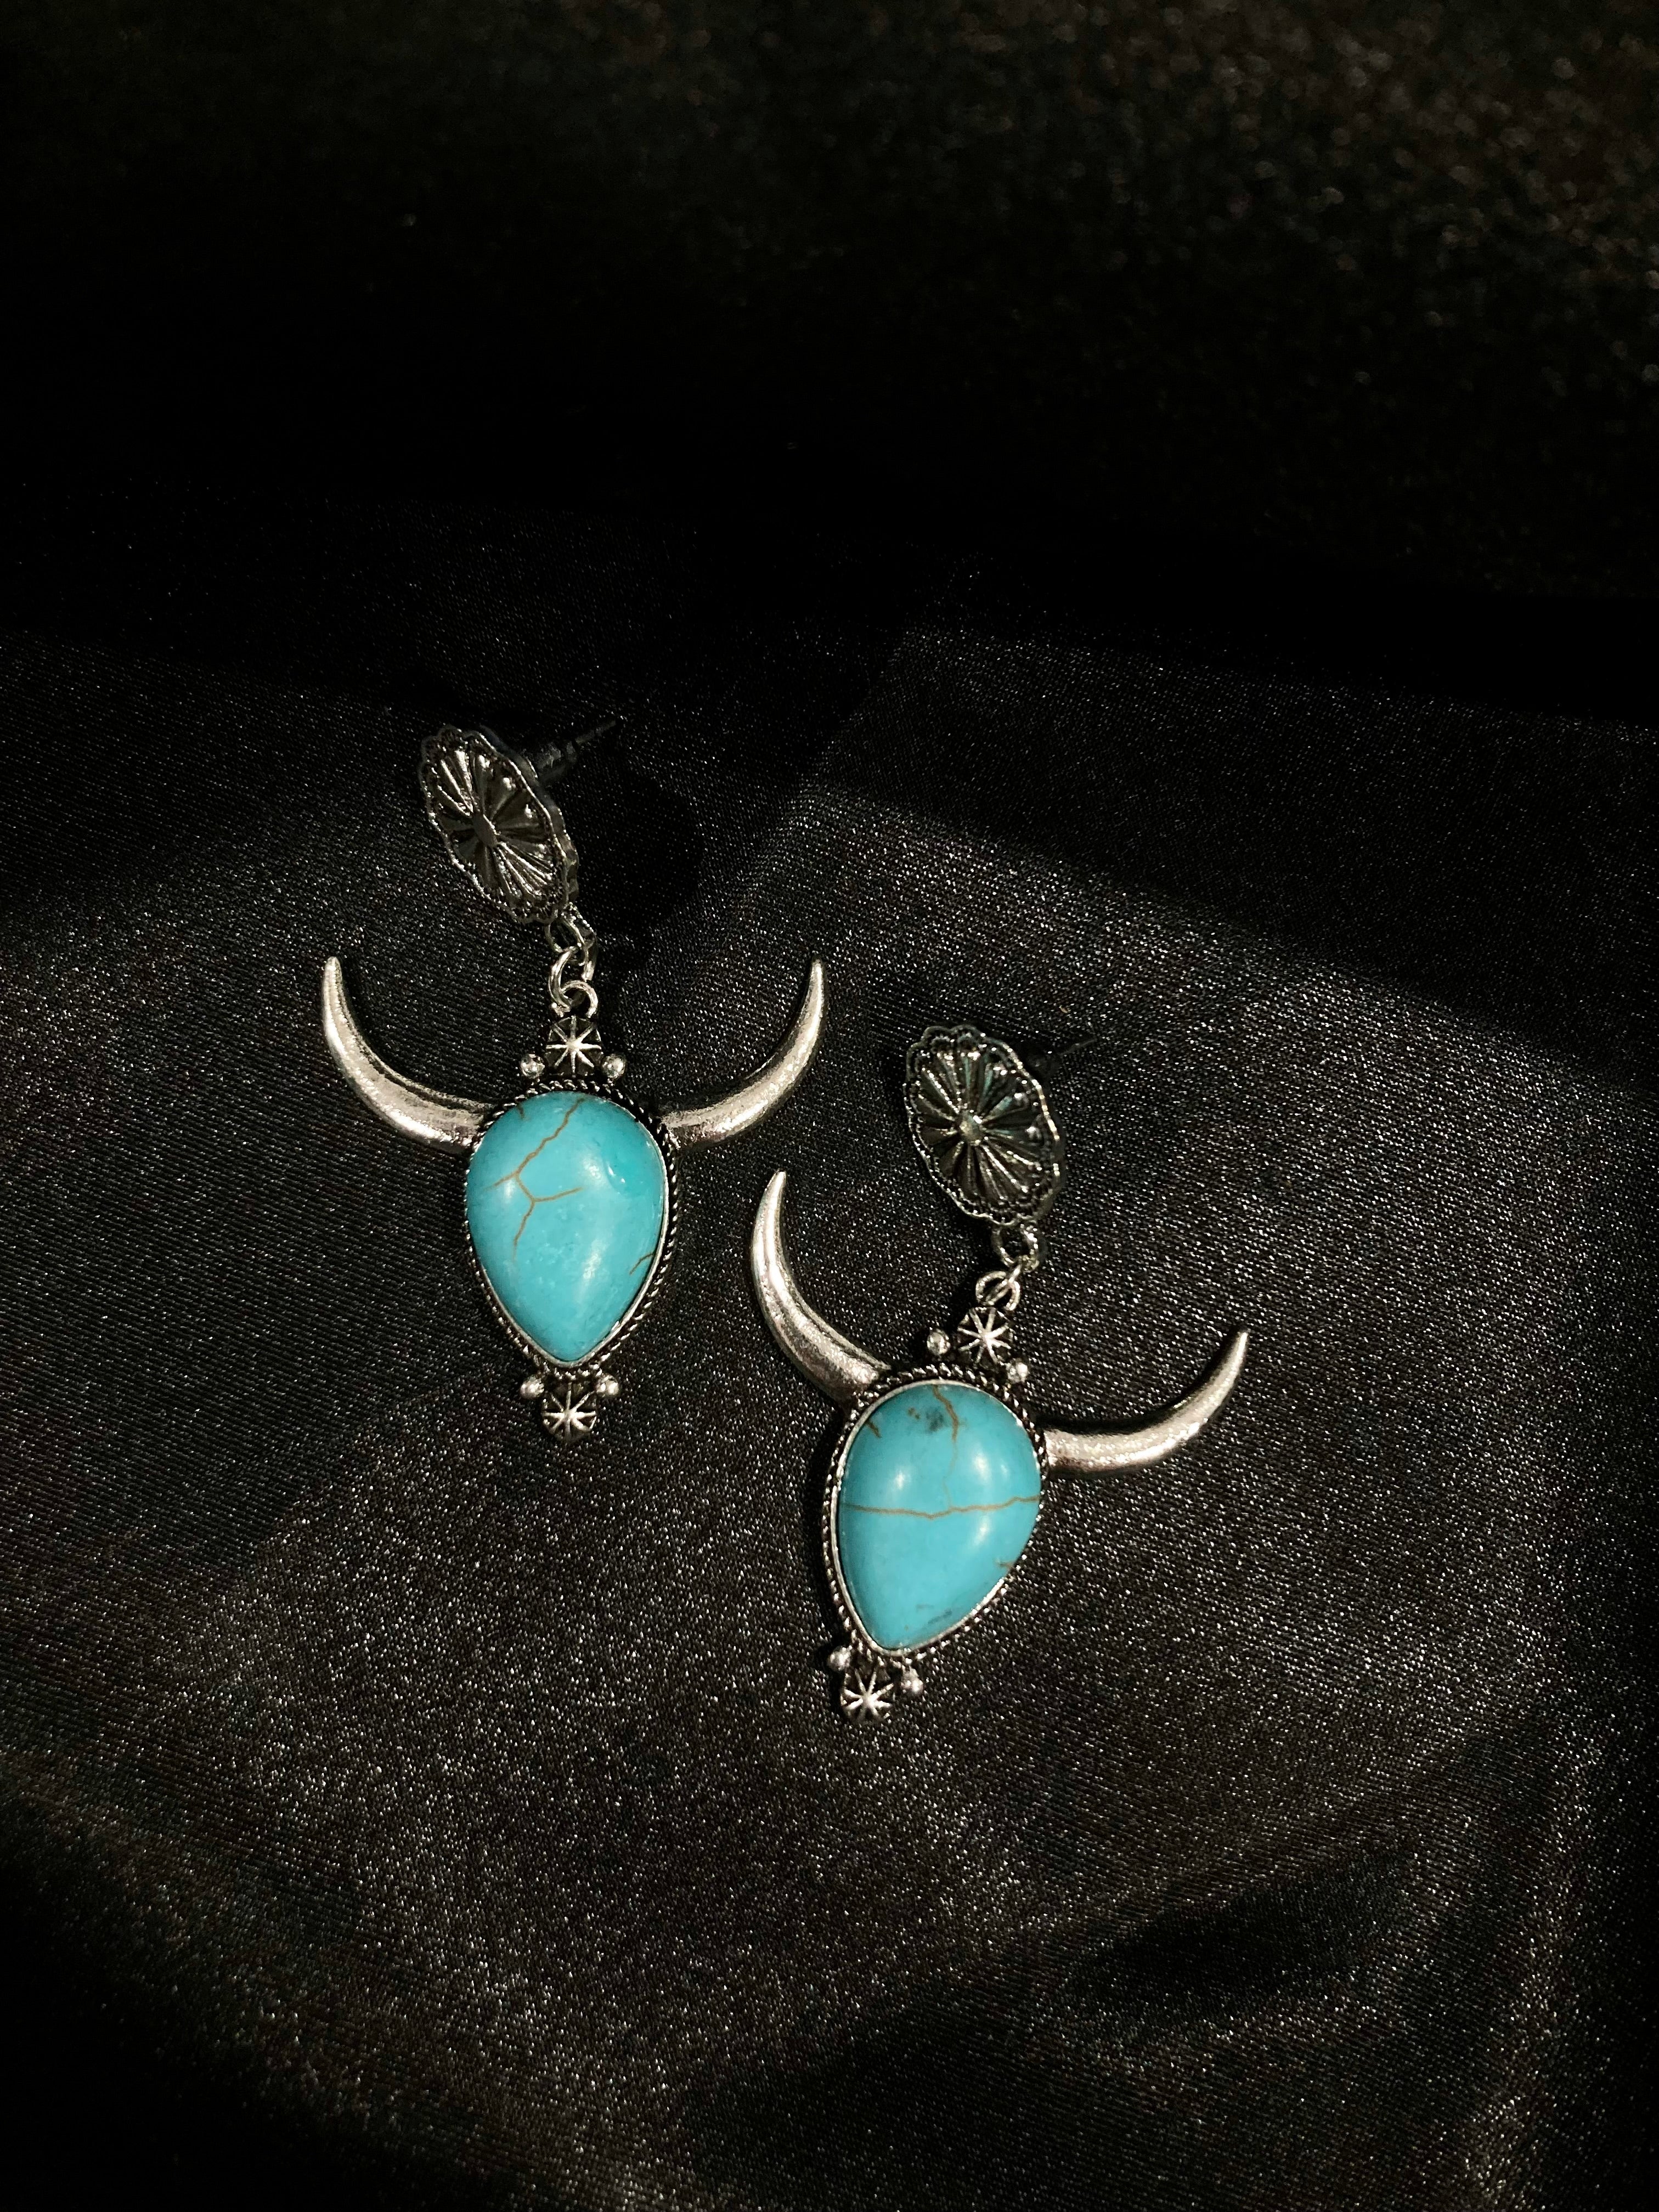 Boho Silver Cow Horn Earrings with Turquoise Stone